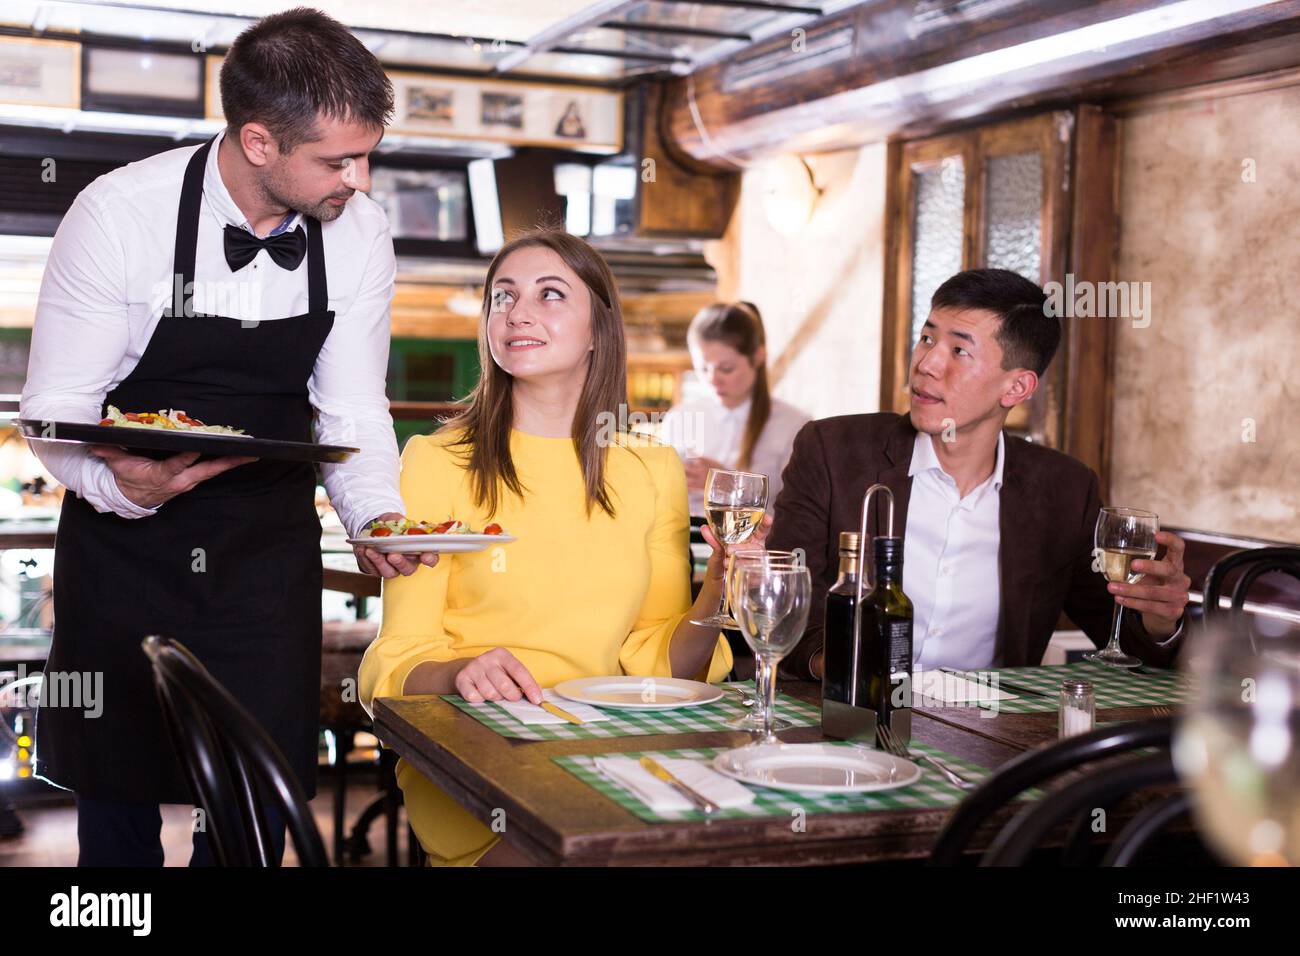 Man waiter is brings order to couple who have dinner and drink wine Stock Photo